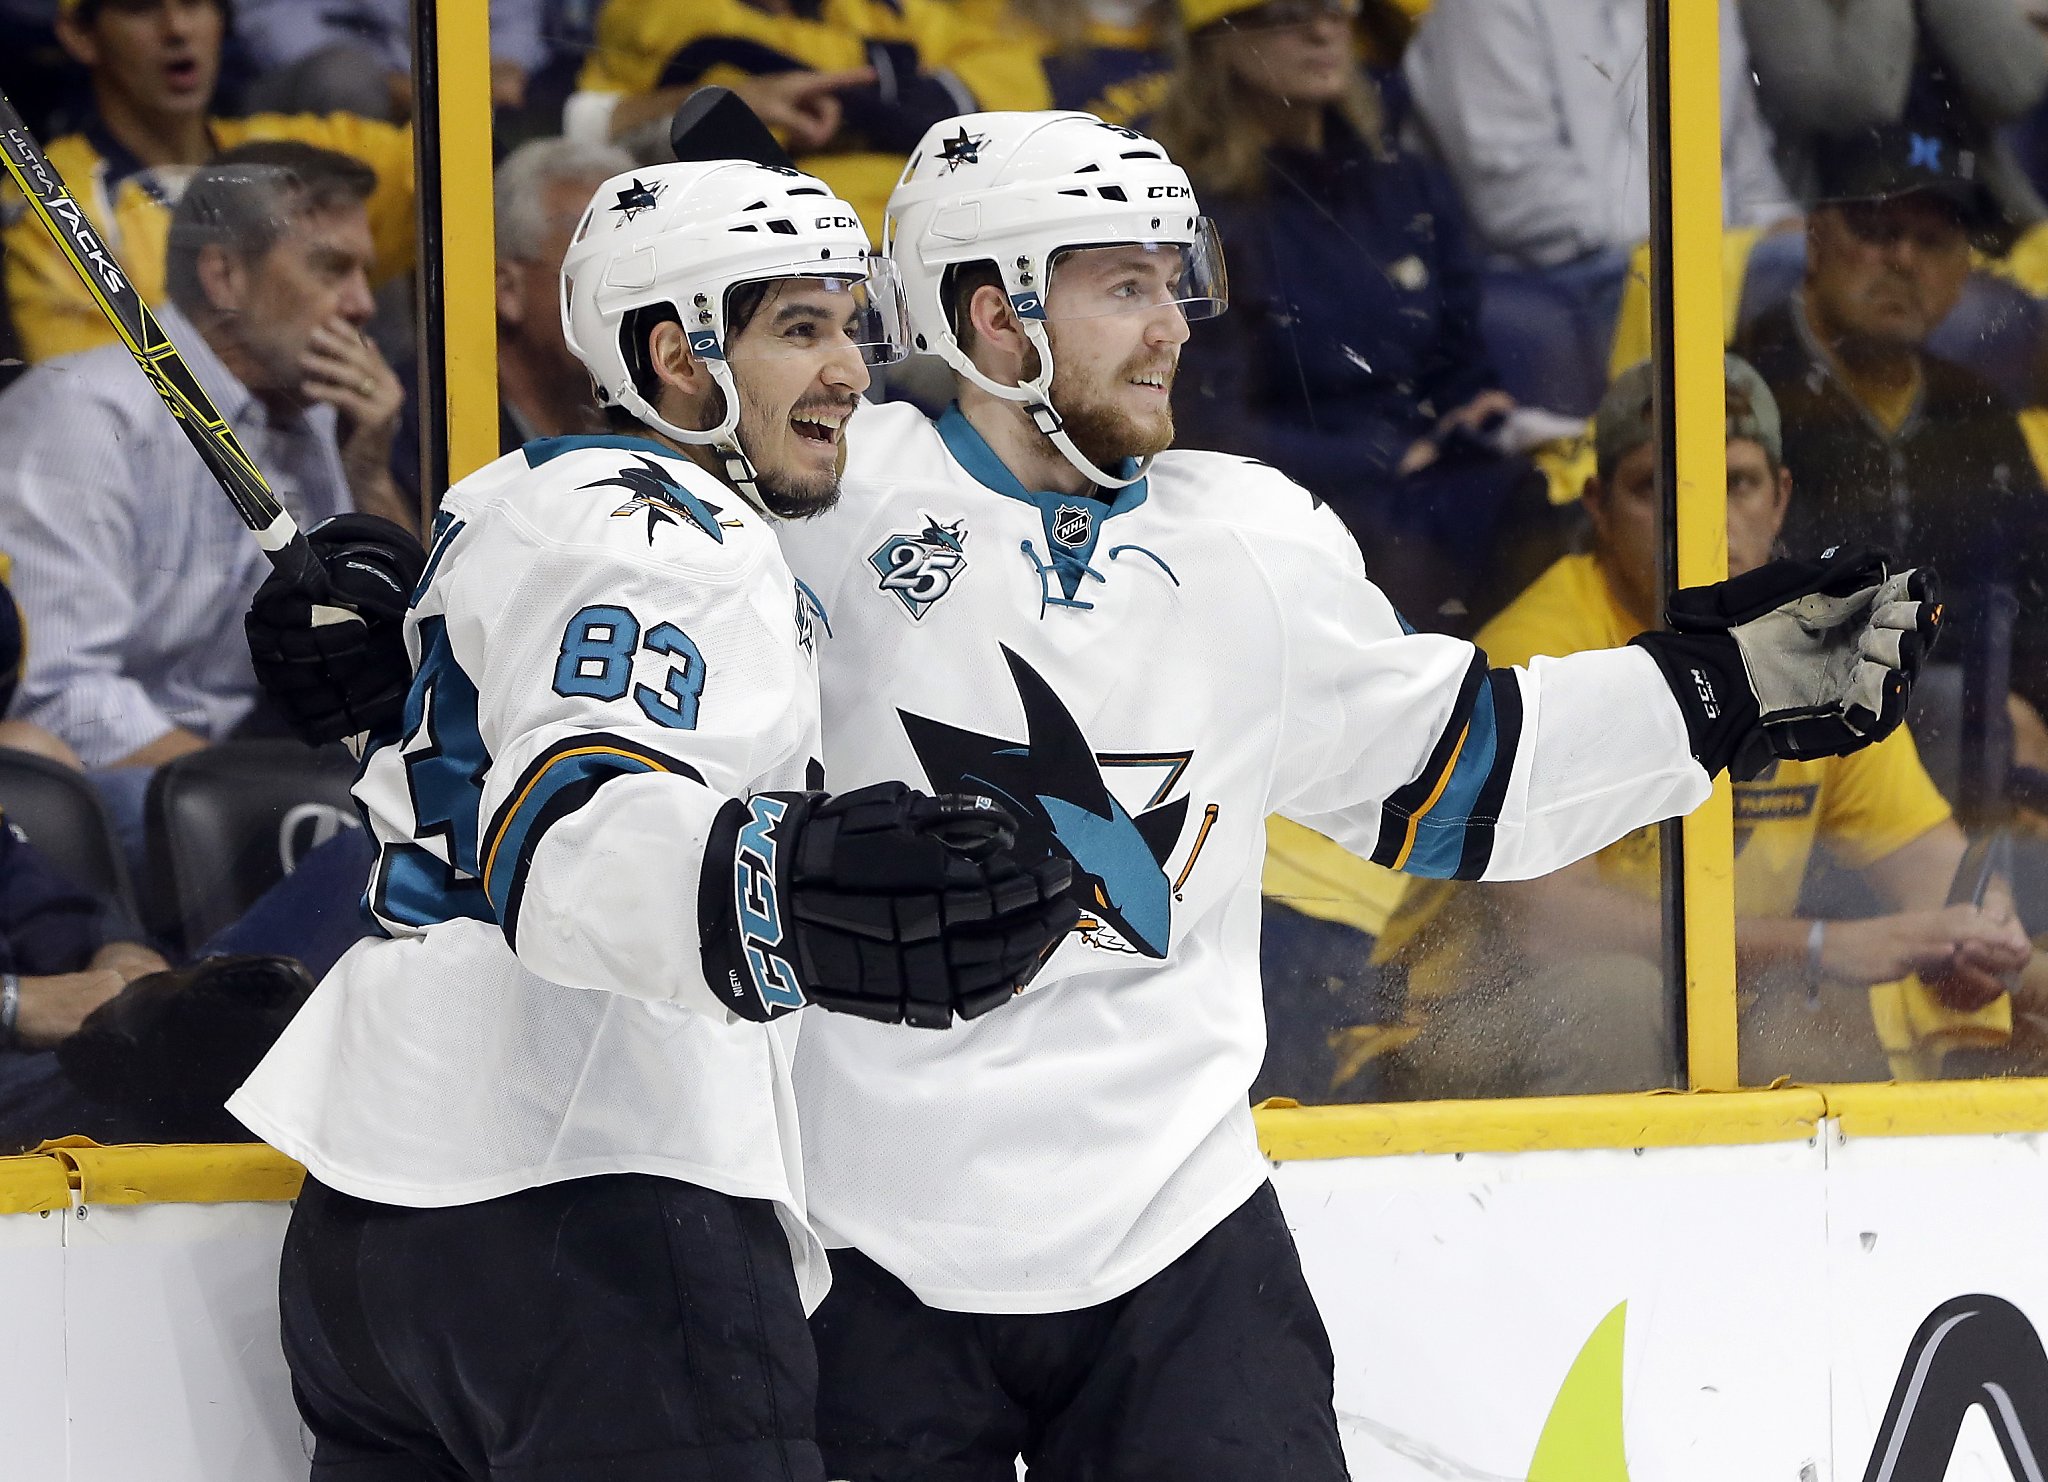 San Jose Sharks: Brent Burns comes up clutch with insane goal of